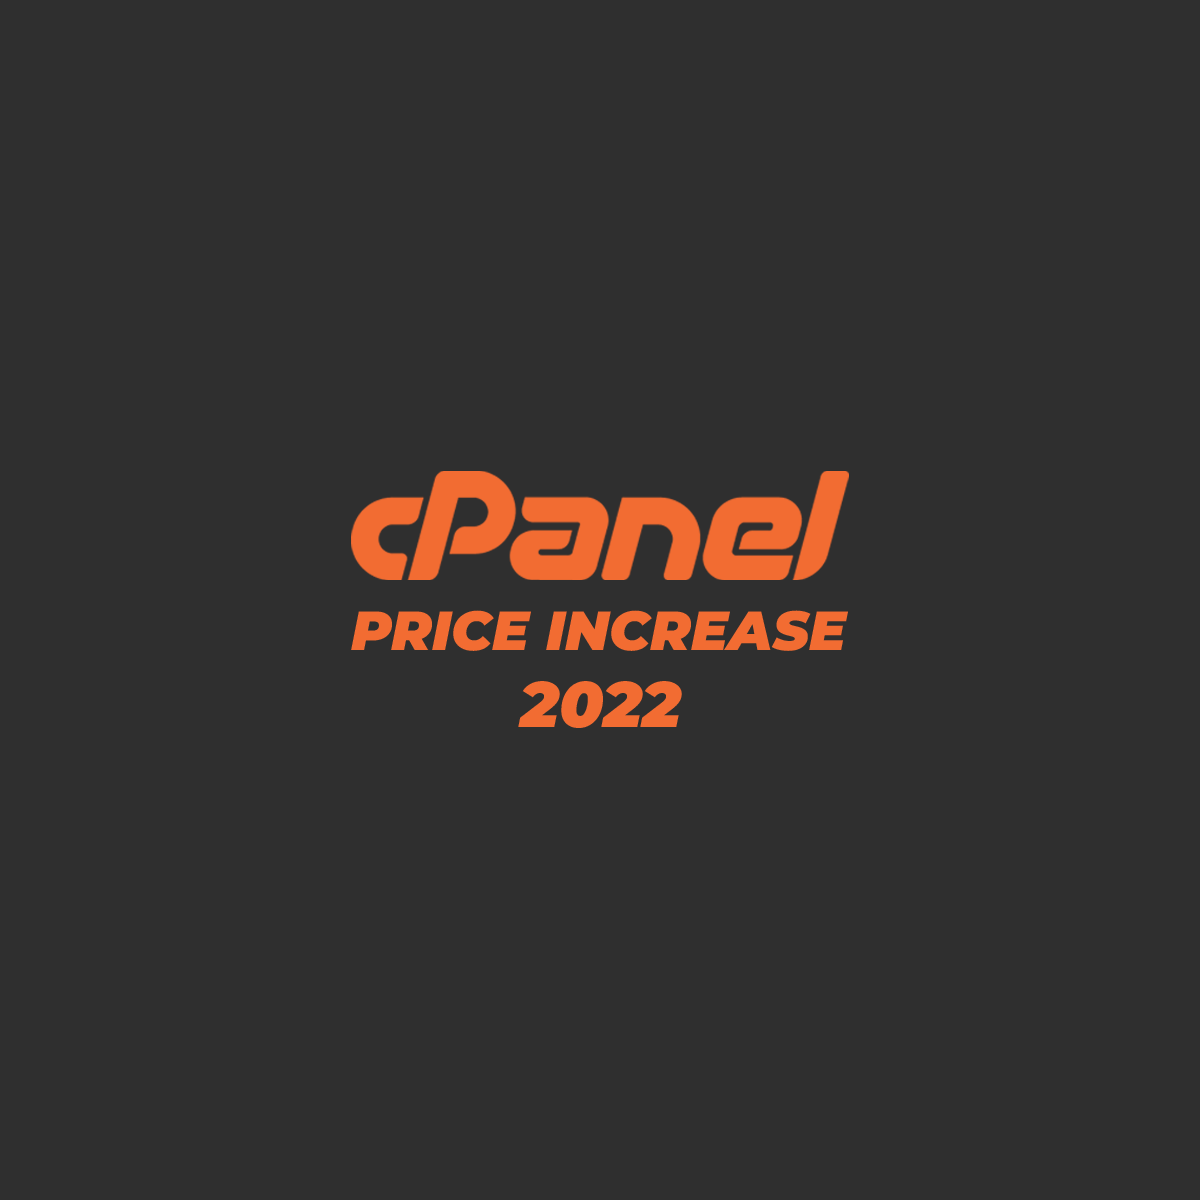 cpanel to increase prices at the end of 2022